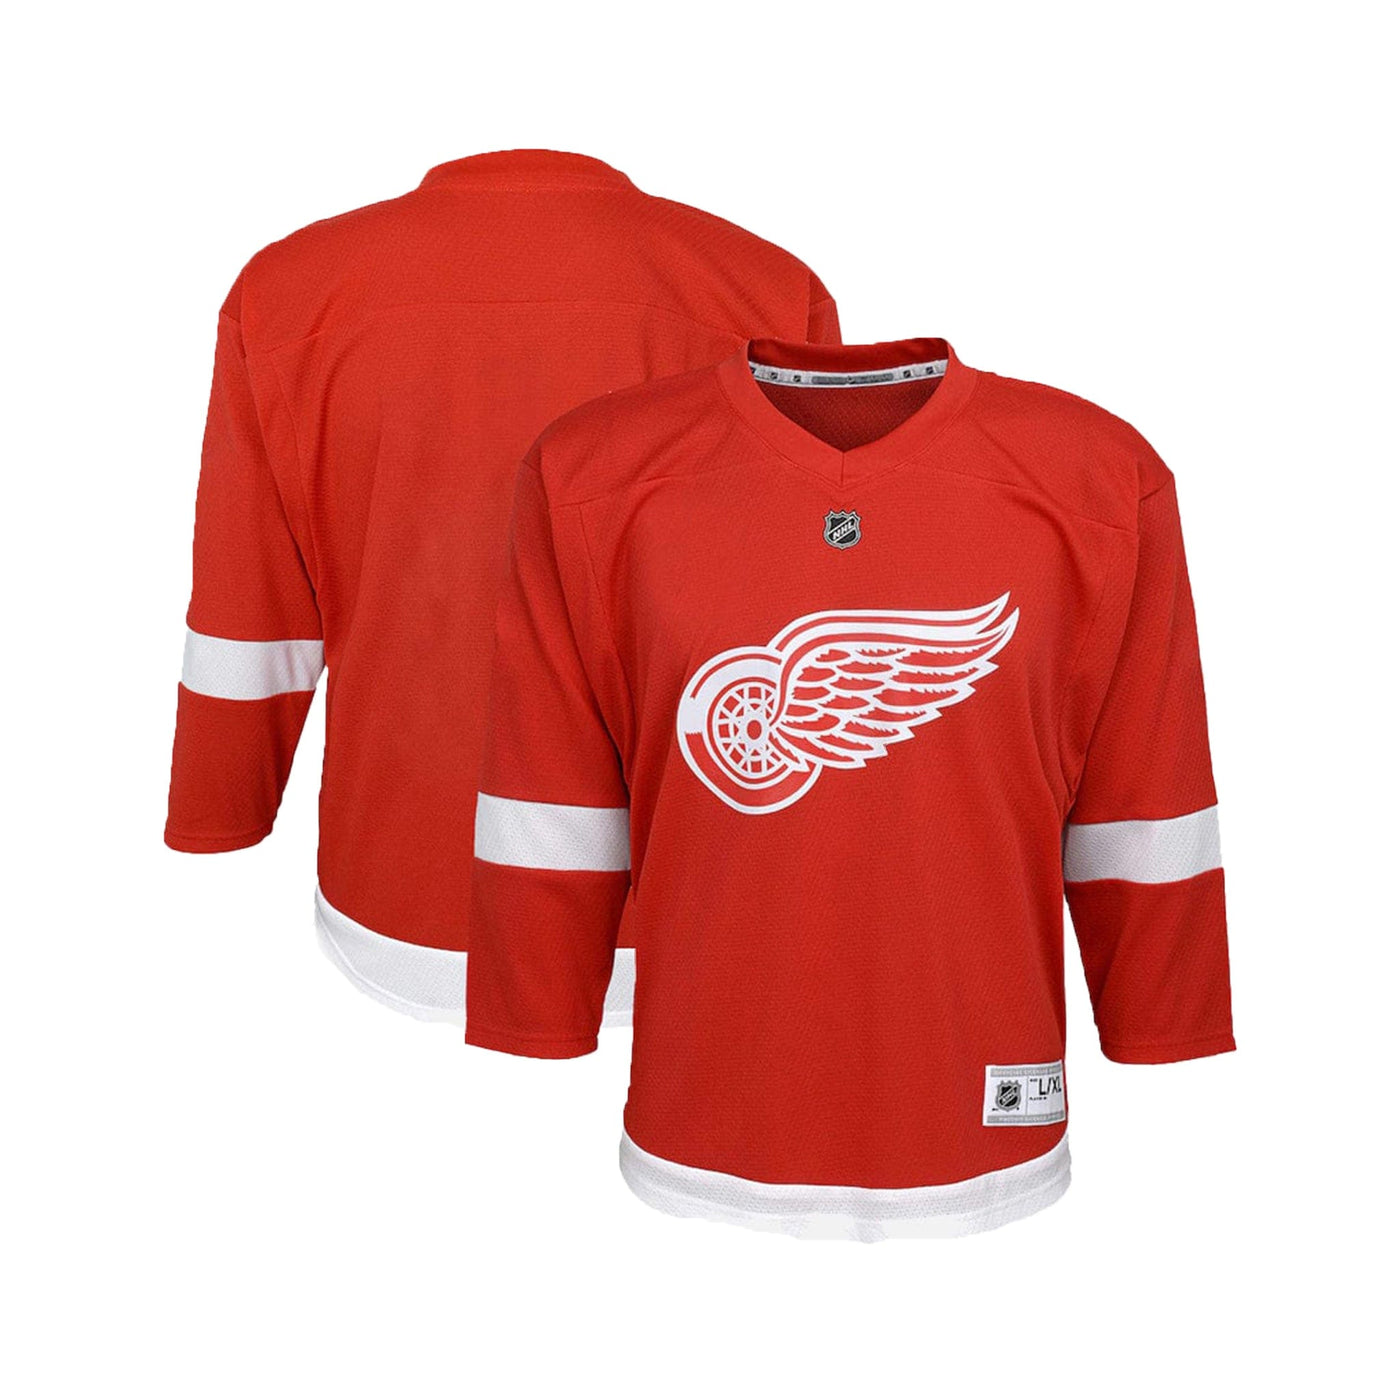 Detroit Red Wings Home Outer Stuff Replica Toddler Jersey - The Hockey Shop Source For Sports